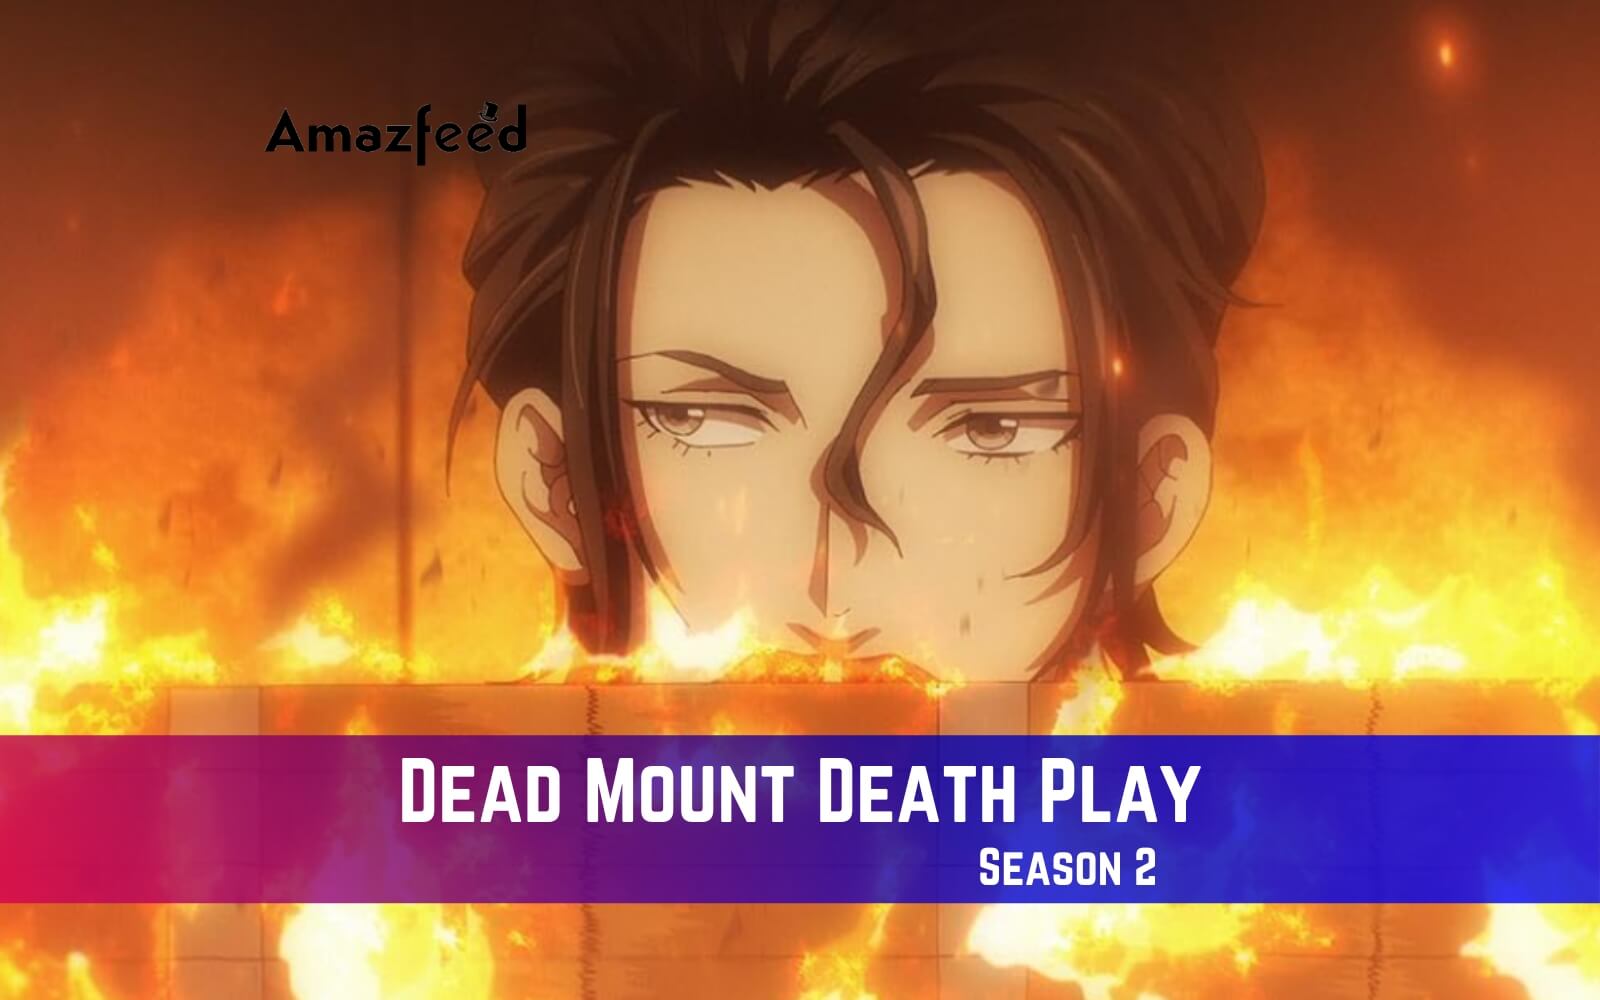 Dead Mount Death Play part 2 gets release date with a new trailer